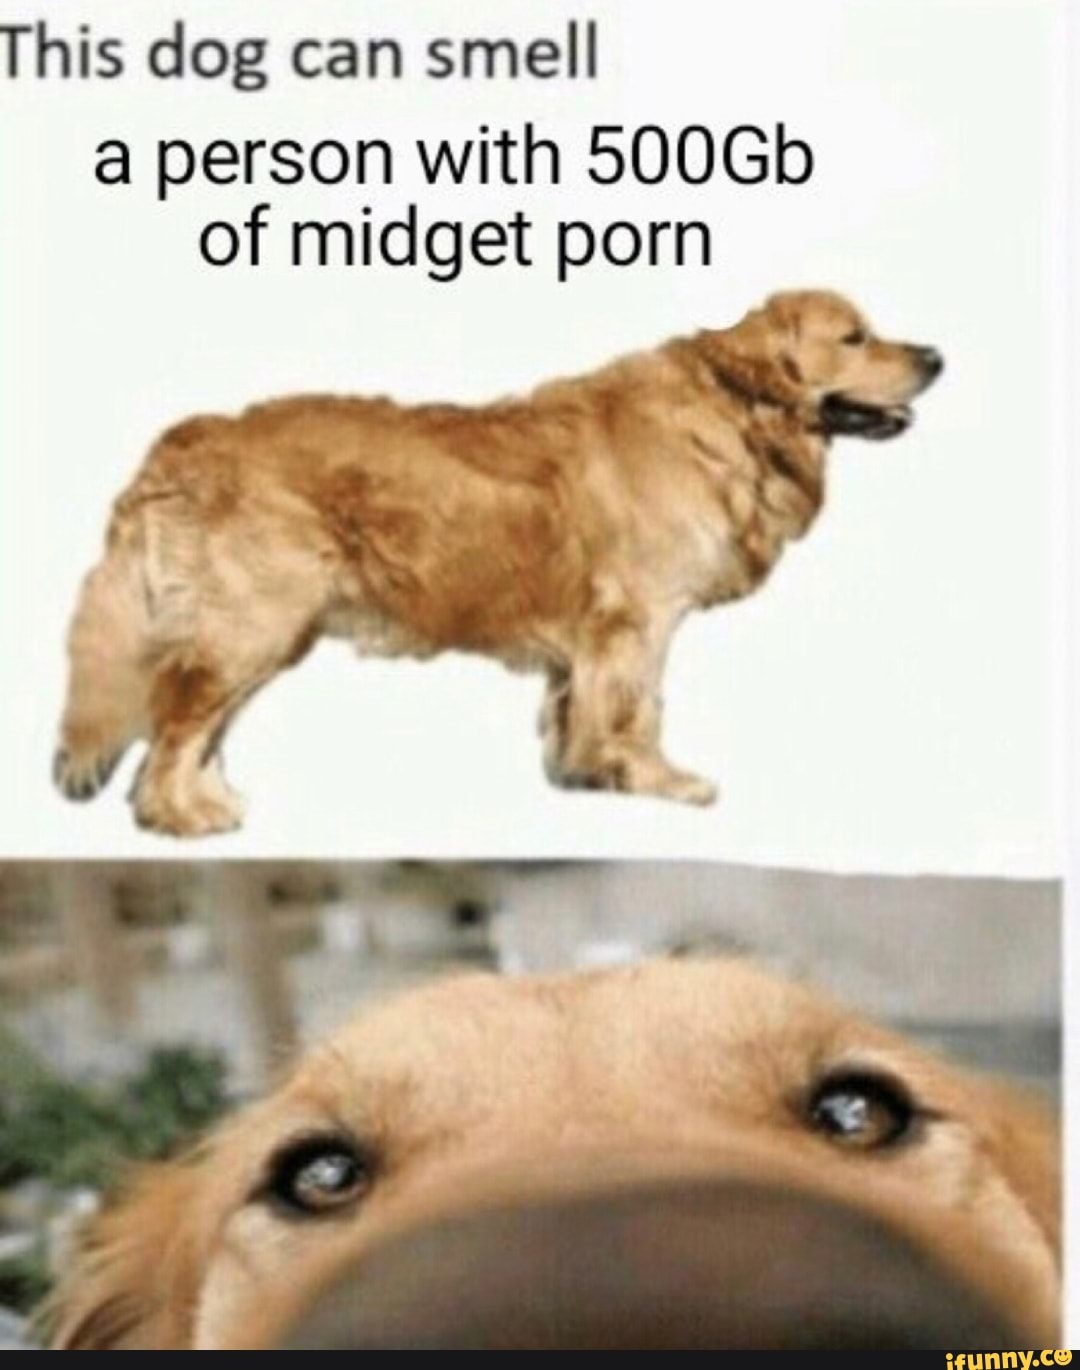 Midget Dog Porn - This dog can smell a person with 500Gb of midget porn ...